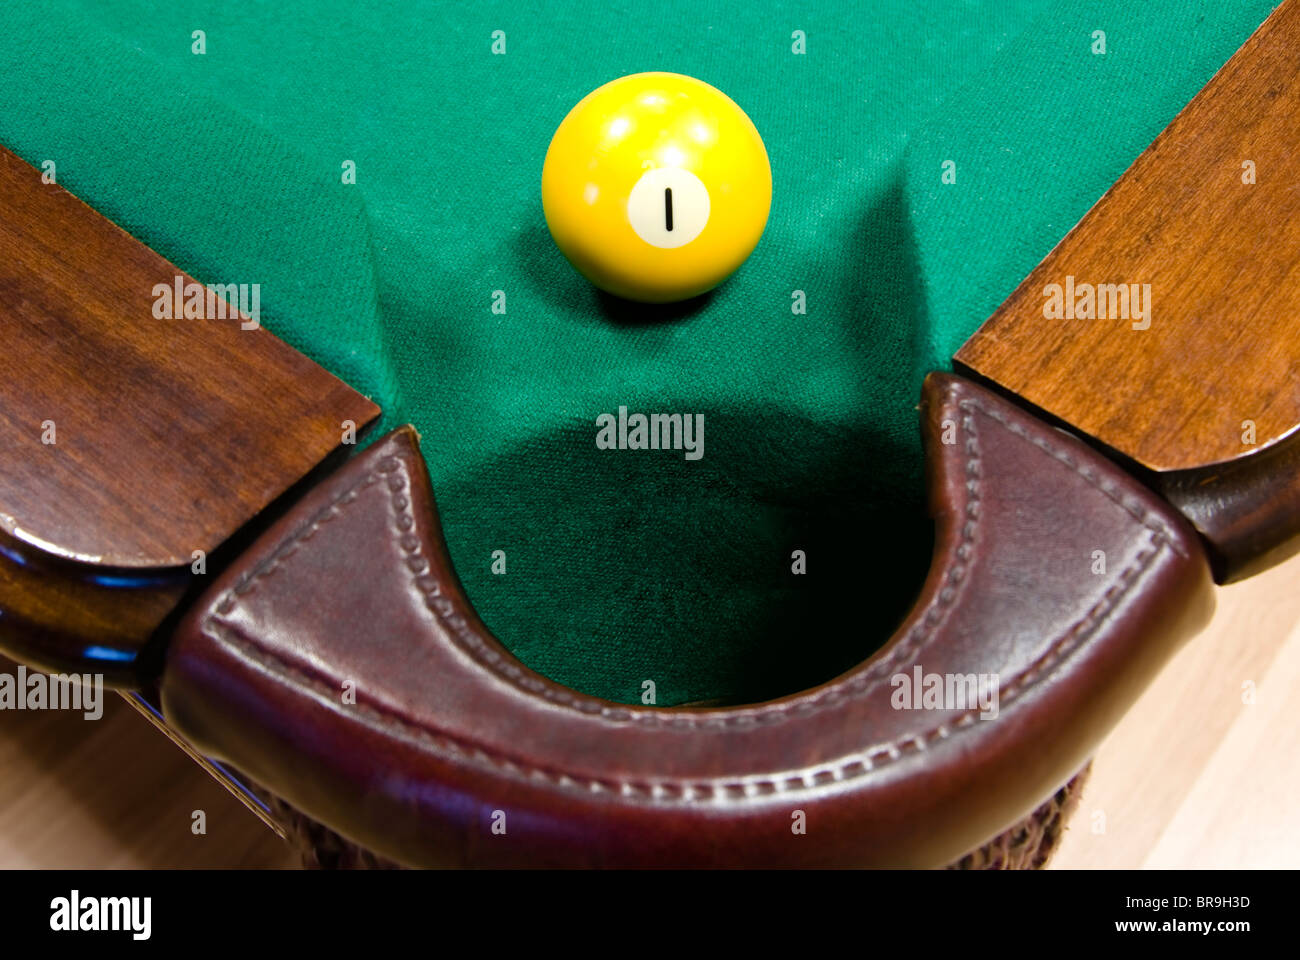 yellow billiard ball with number "one" in front of corner pocket on green  baize table Stock Photo - Alamy